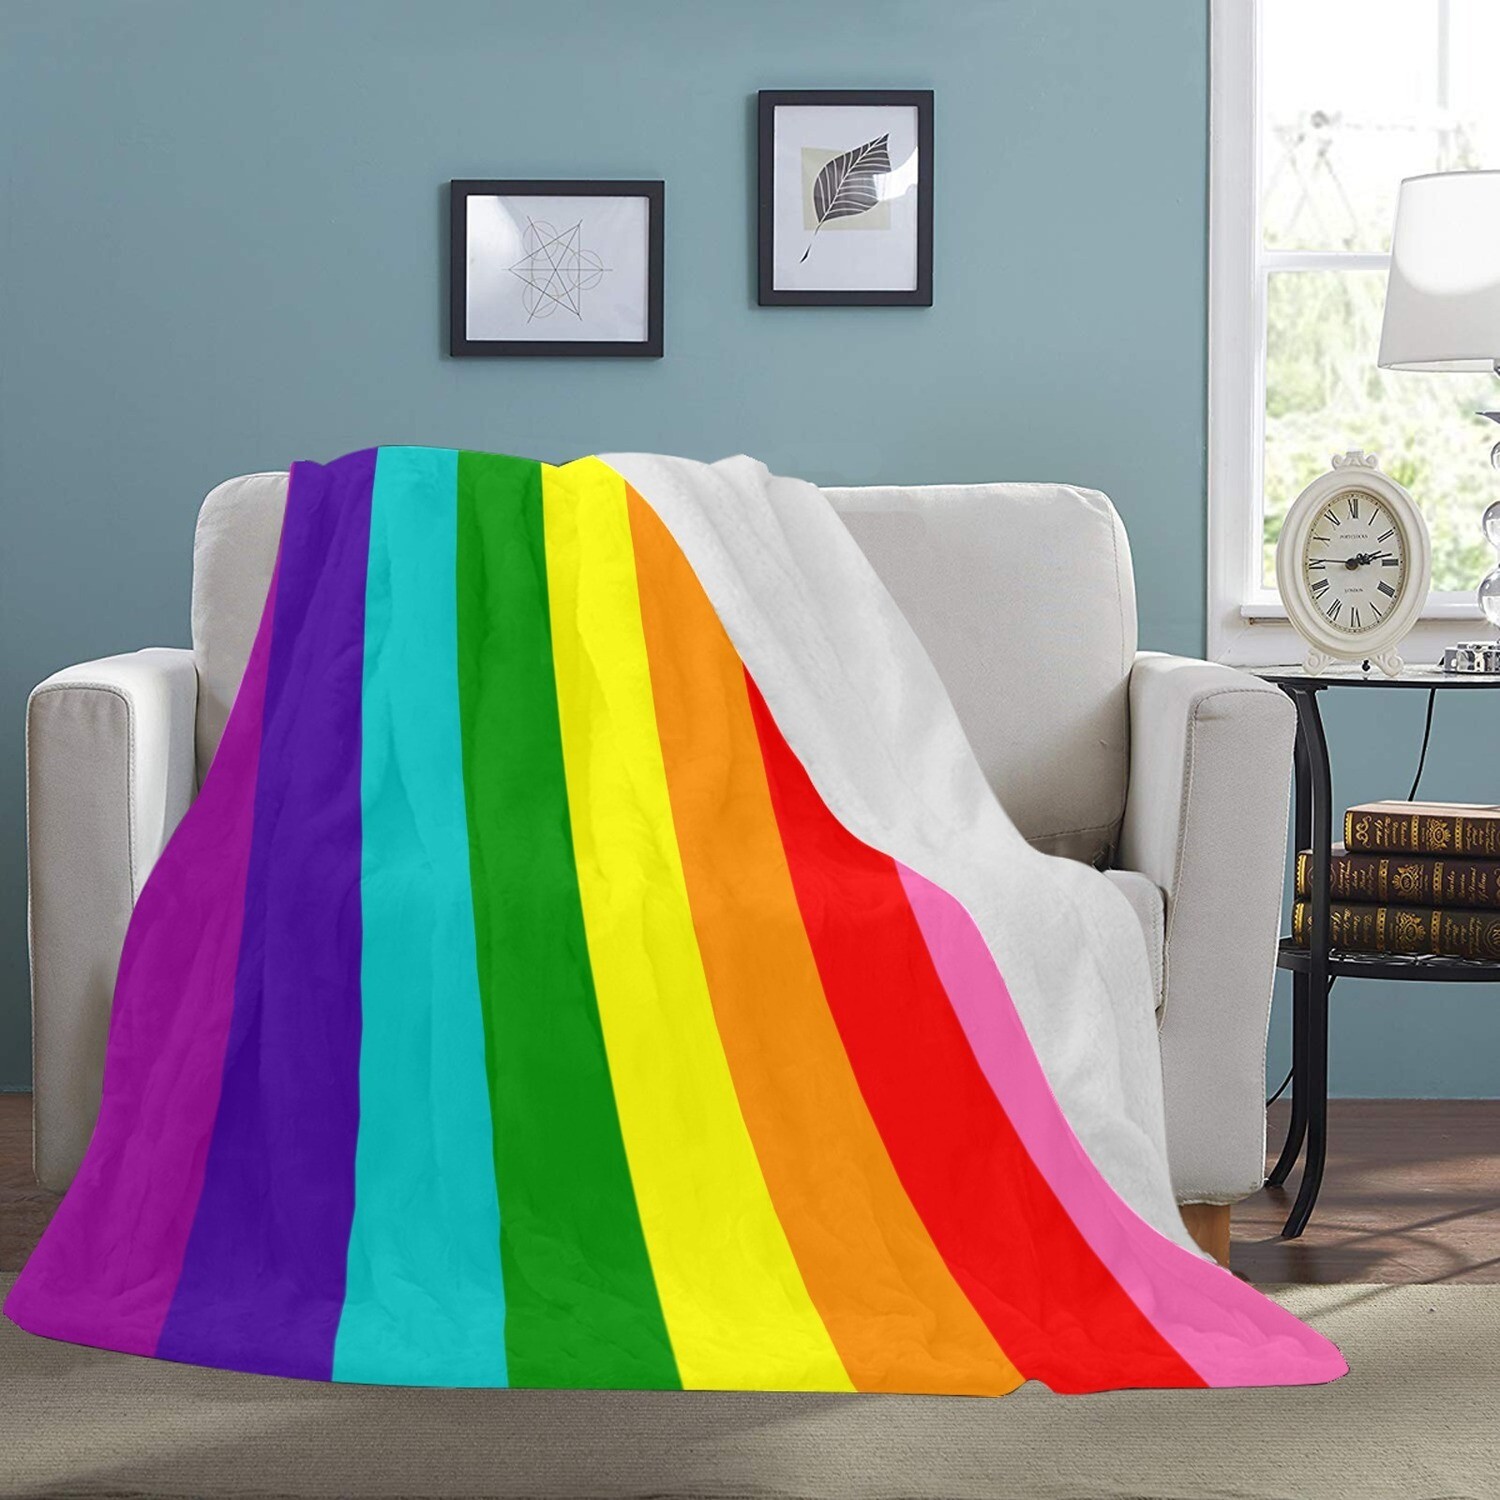 🤴🏽👸🏽🏳️‍🌈 Large Ultra-Soft Micro Fleece Blanket Love is Love LGBTQ flag, rainbow flag, pride flag, gift, gift for her, gift for him, gift for them, 70"x80"